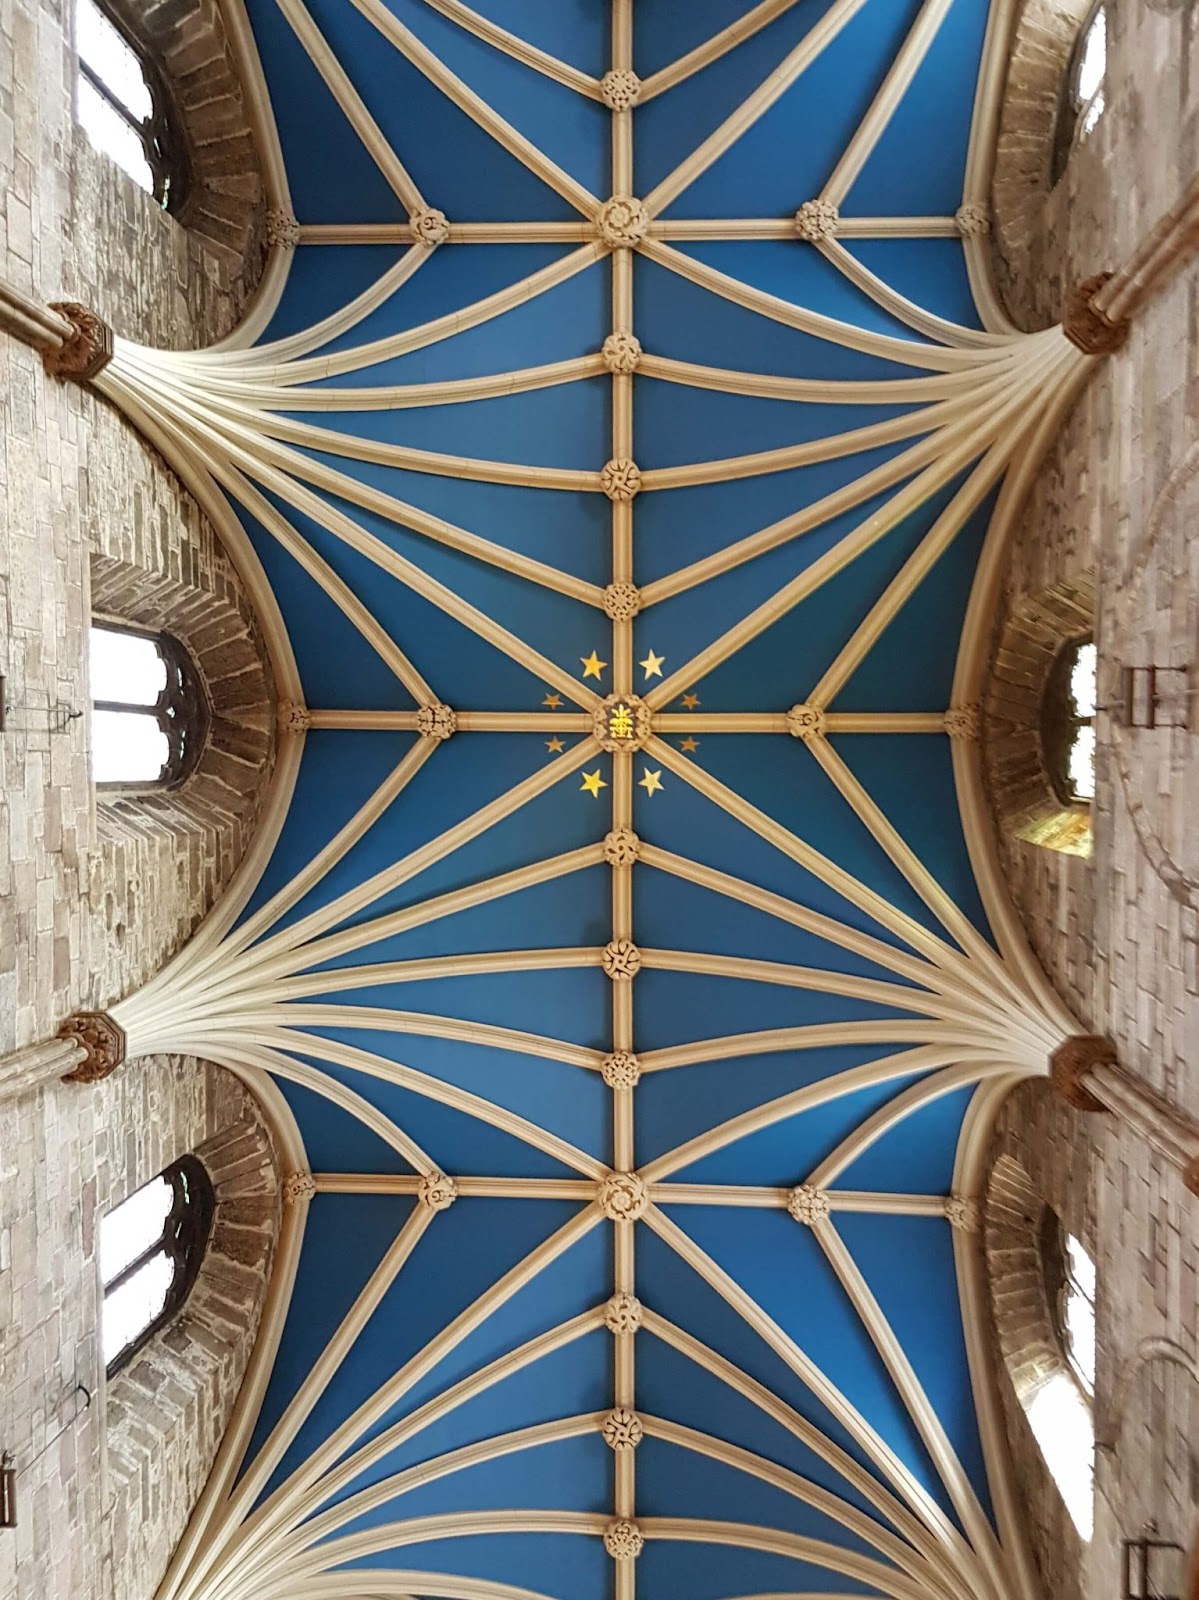 24 hours in Edinburgh. This is an image of the ceiling at St Giles Cathedral.